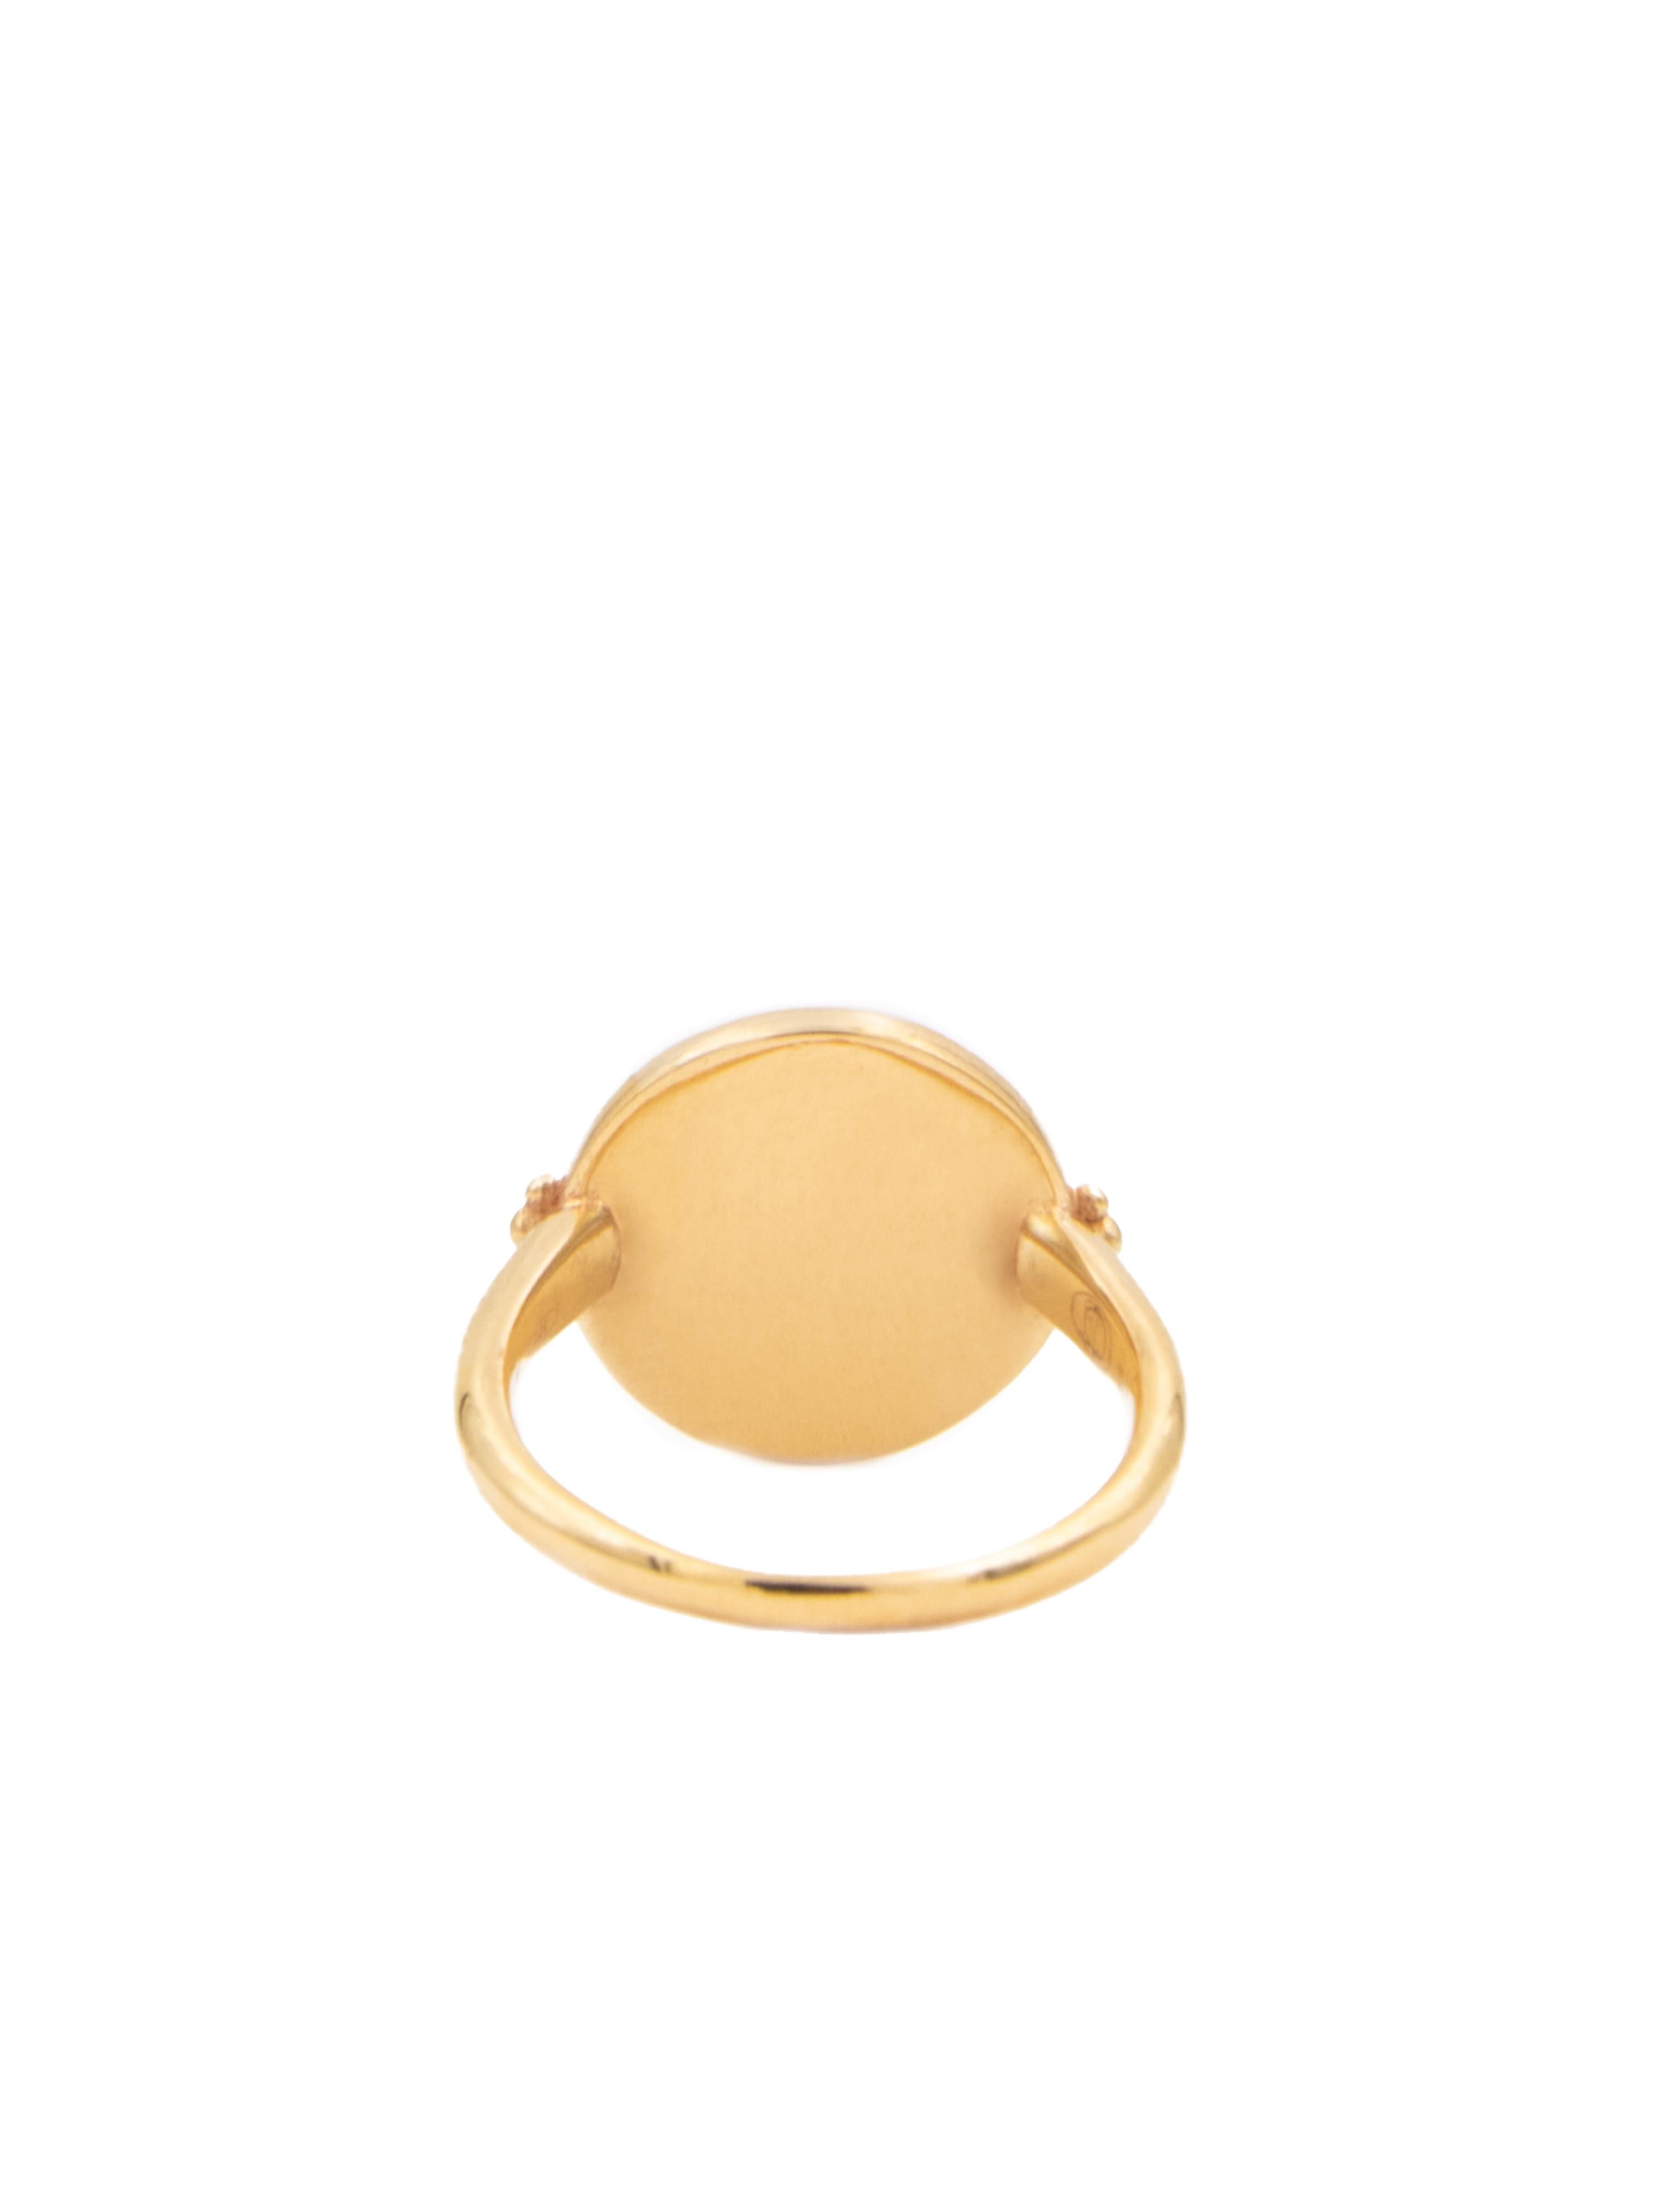 Contemporary Julia-Didon Cayre Diamond Ring in 18 Karat Yellow Gold For Sale